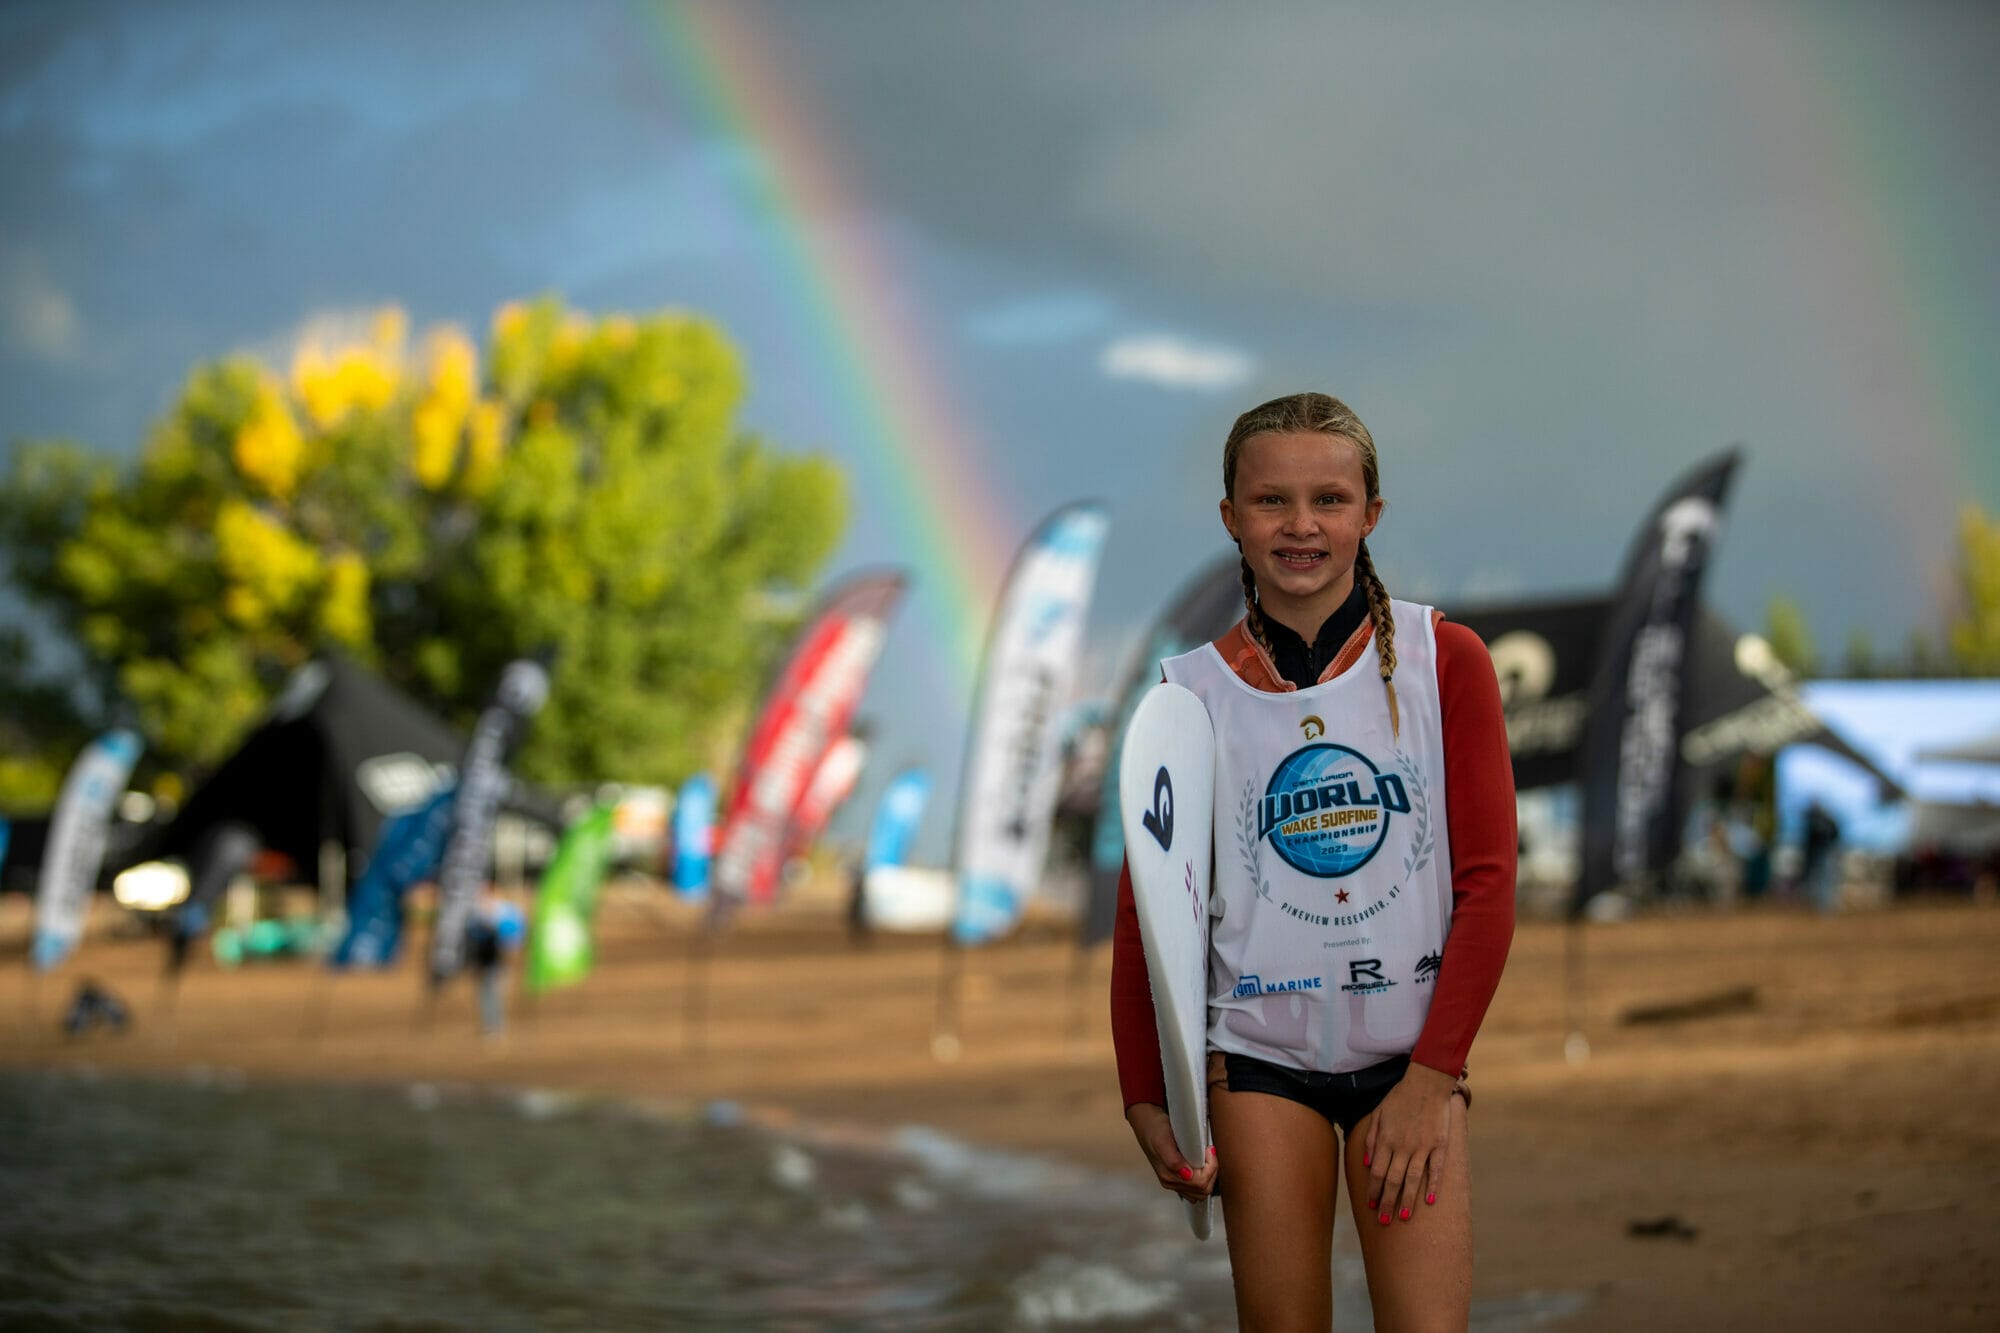 A girl with a wakesurf board standing on the beach with a rainbow in the background.